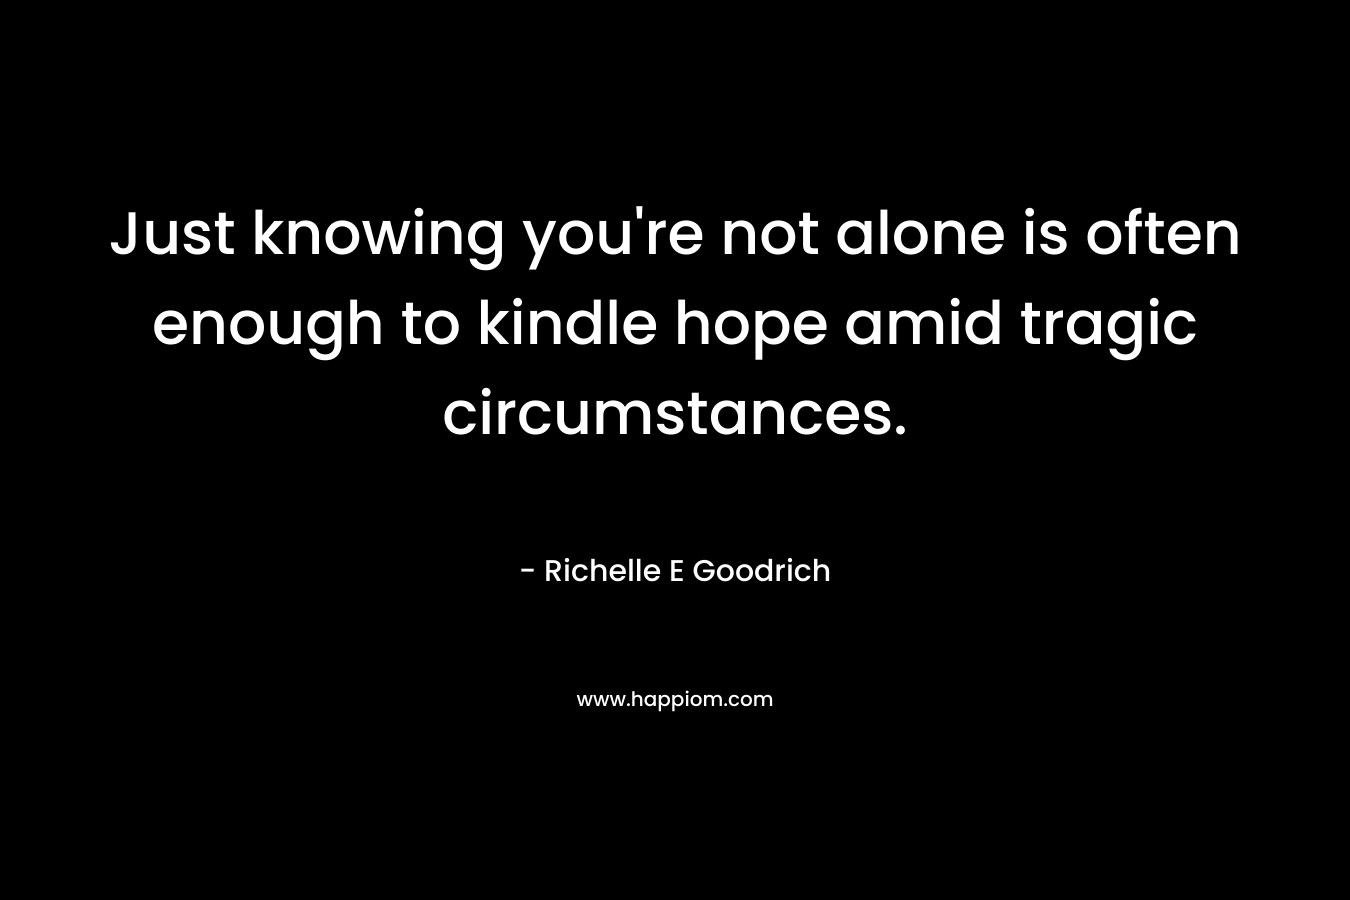 Just knowing you're not alone is often enough to kindle hope amid tragic circumstances.